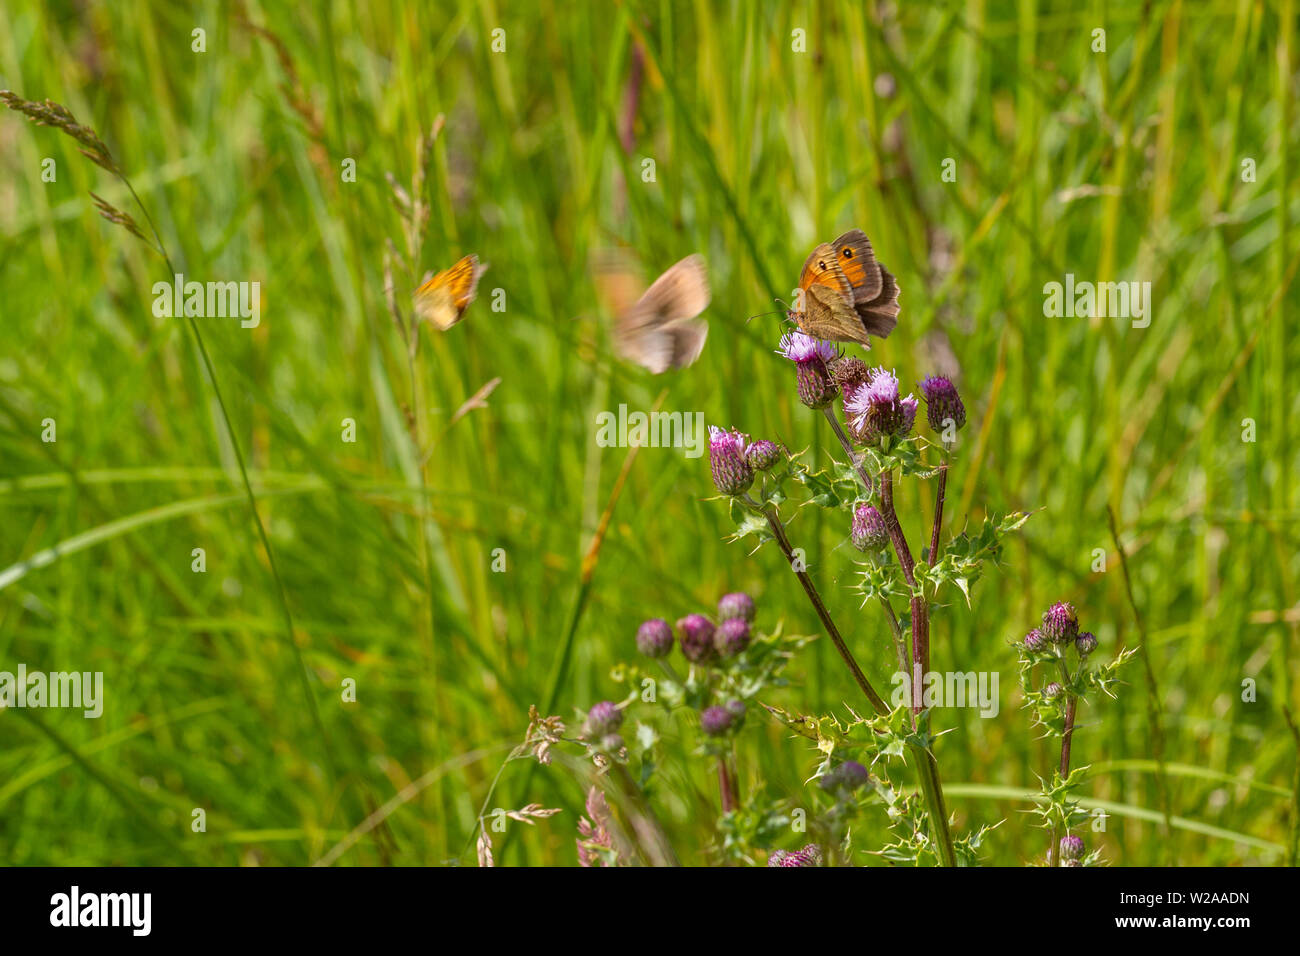 UK wildlife: Multiple butterflies (skipper and meadow browns) on thistle flowers in the countryside. Stock Photo